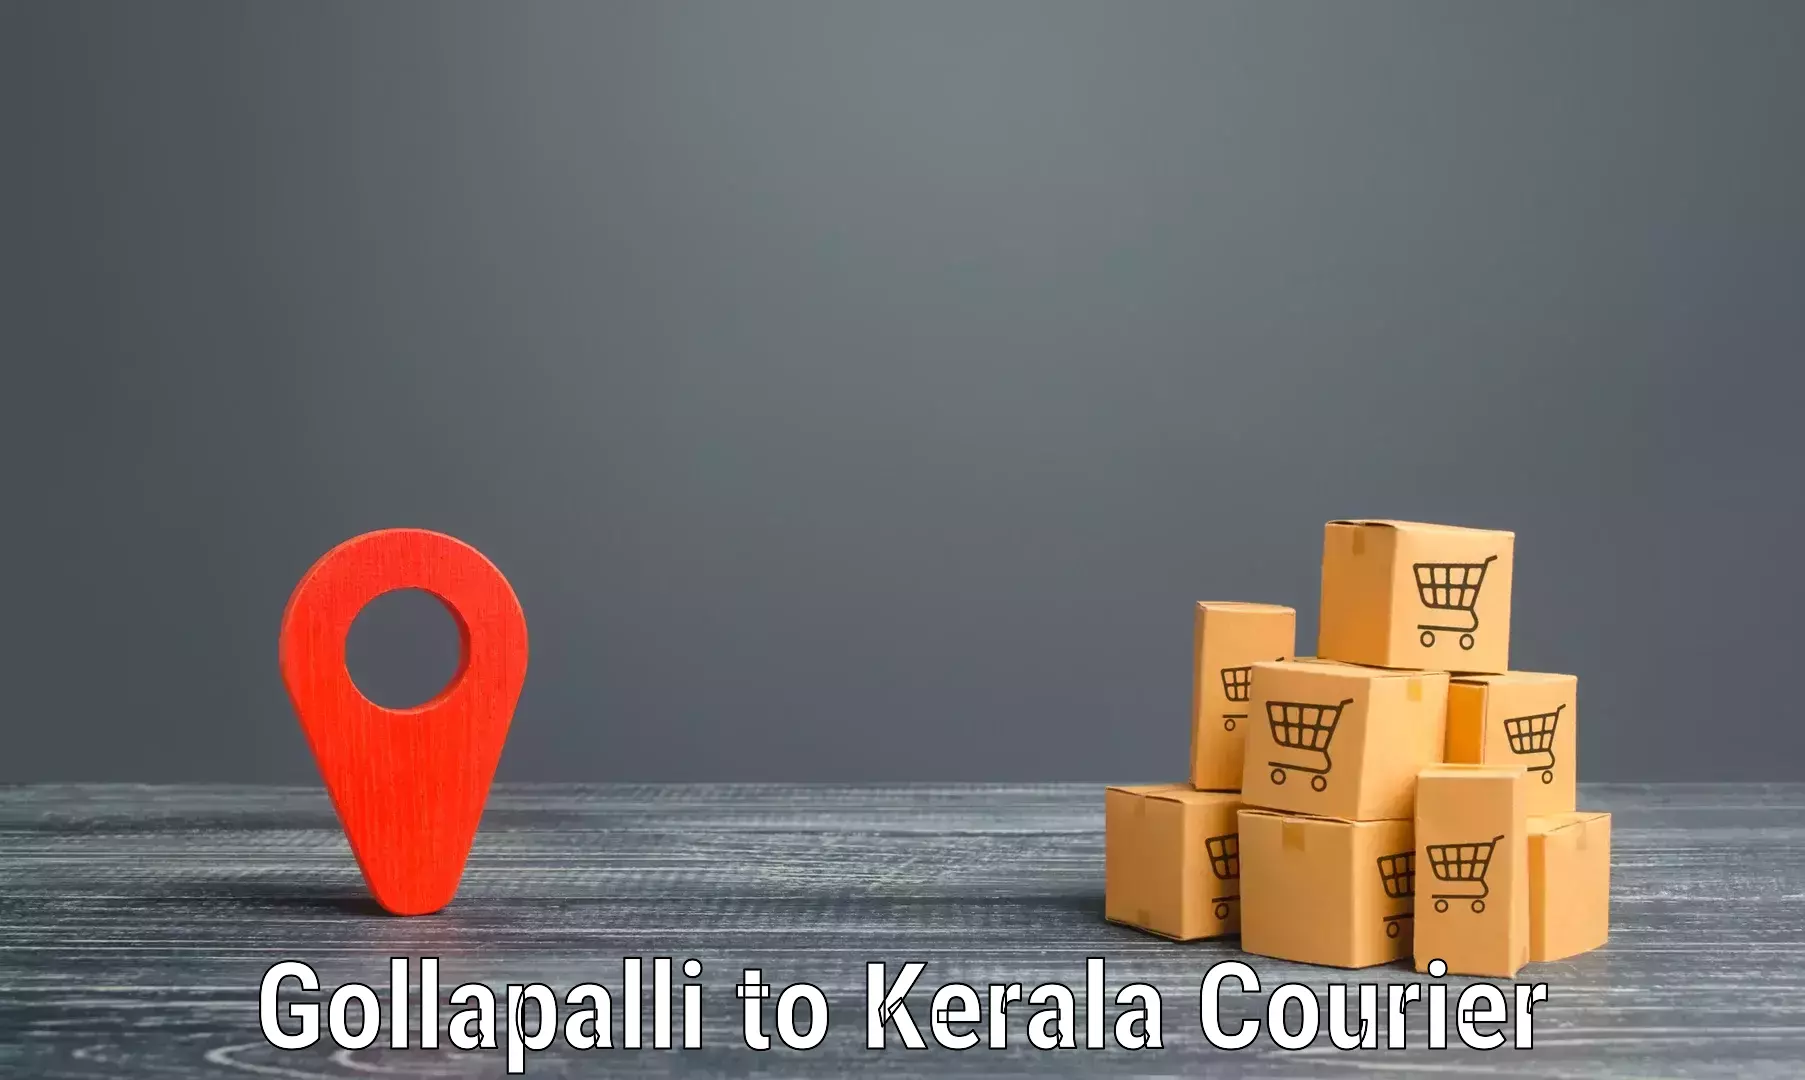 Digital courier platforms Gollapalli to Chalakudy